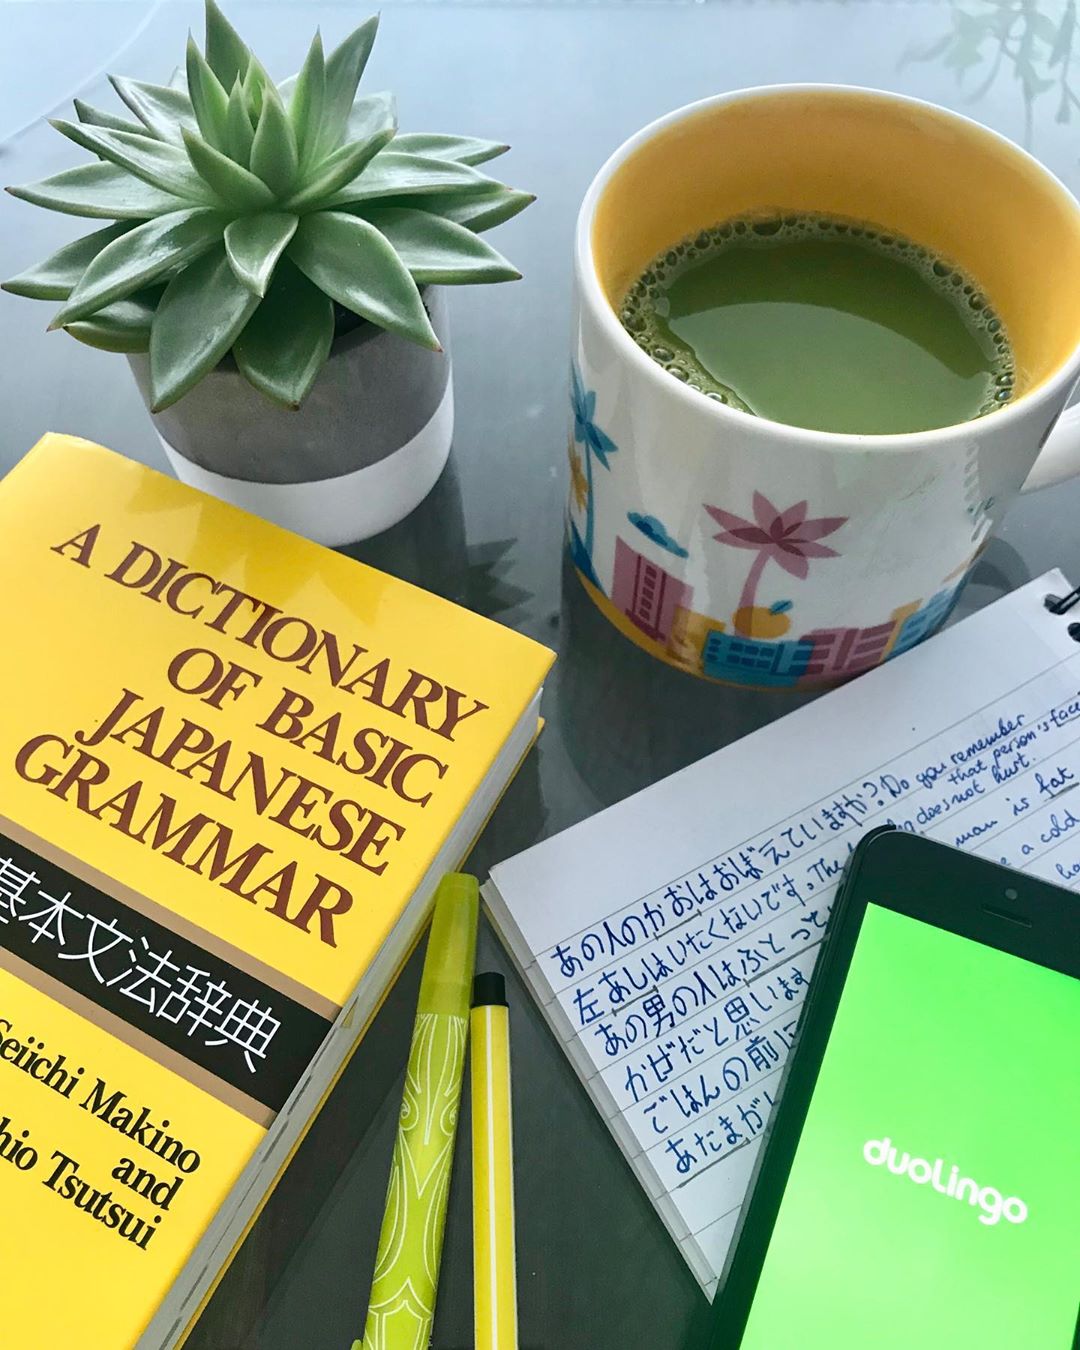 Cup of tea and Japanese language book. Photo by Instagram user @zarryb